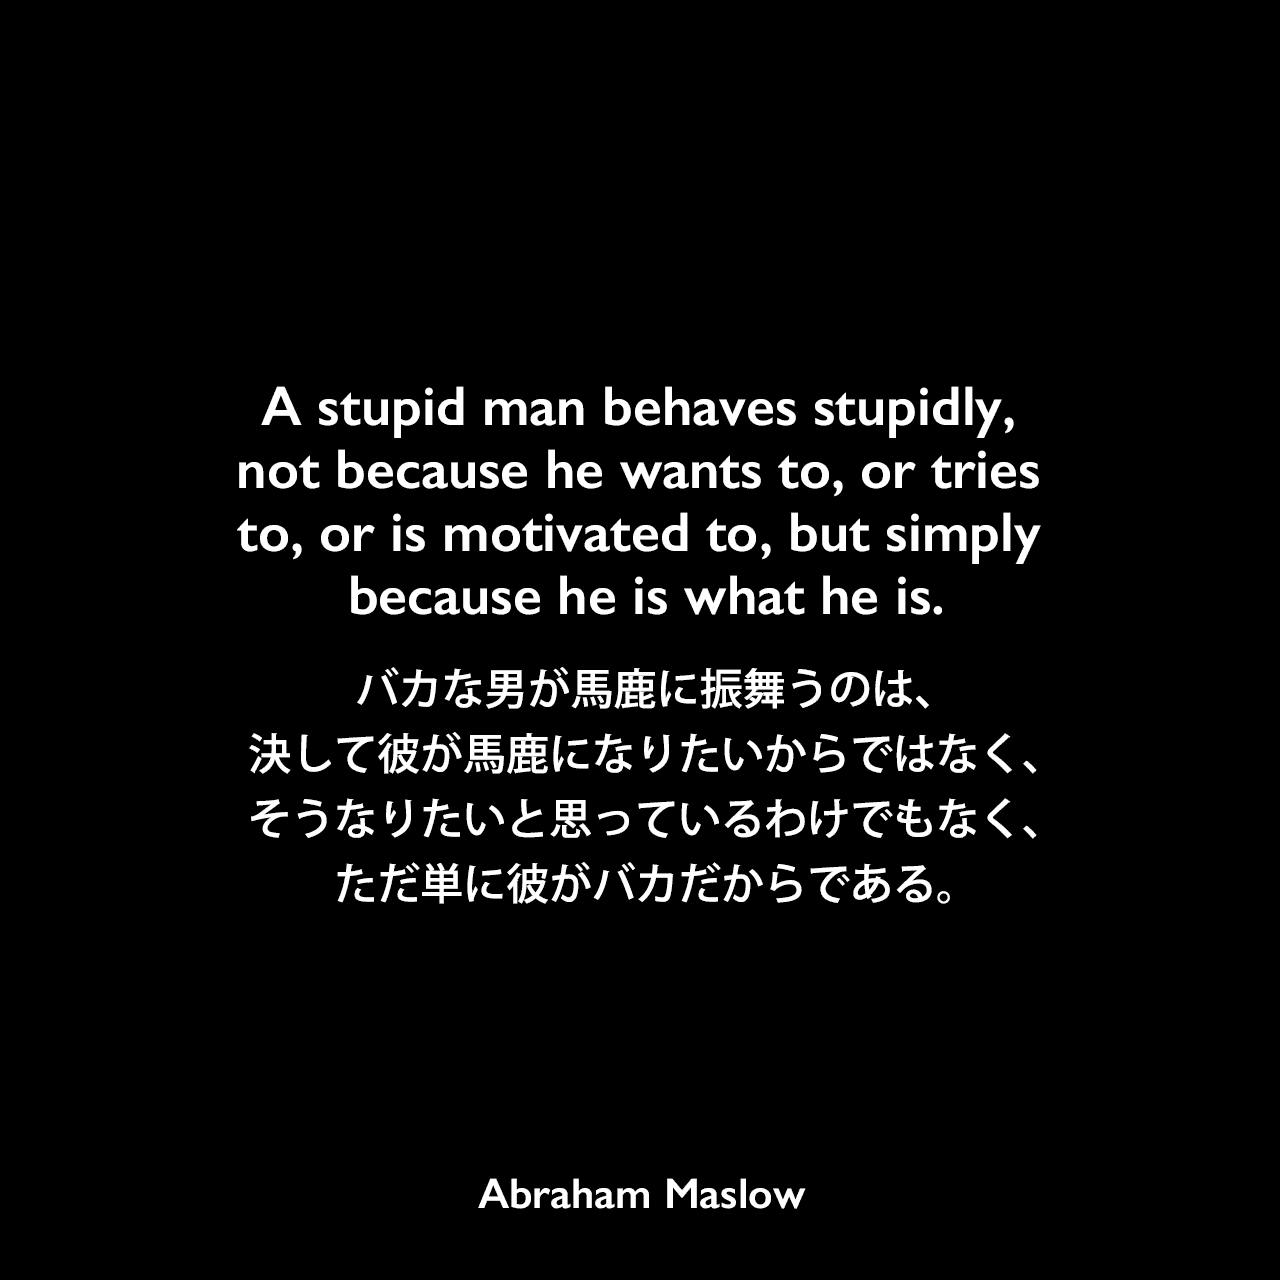 A stupid man behaves stupidly, not because he wants to, or tries to, or is motivated to, but simply because he is what he is.バカな男が馬鹿に振舞うのは、決して彼が馬鹿になりたいからではなく、そうなりたいと思っているわけでもなく、ただ単に彼がバカだからである。Abraham Maslow